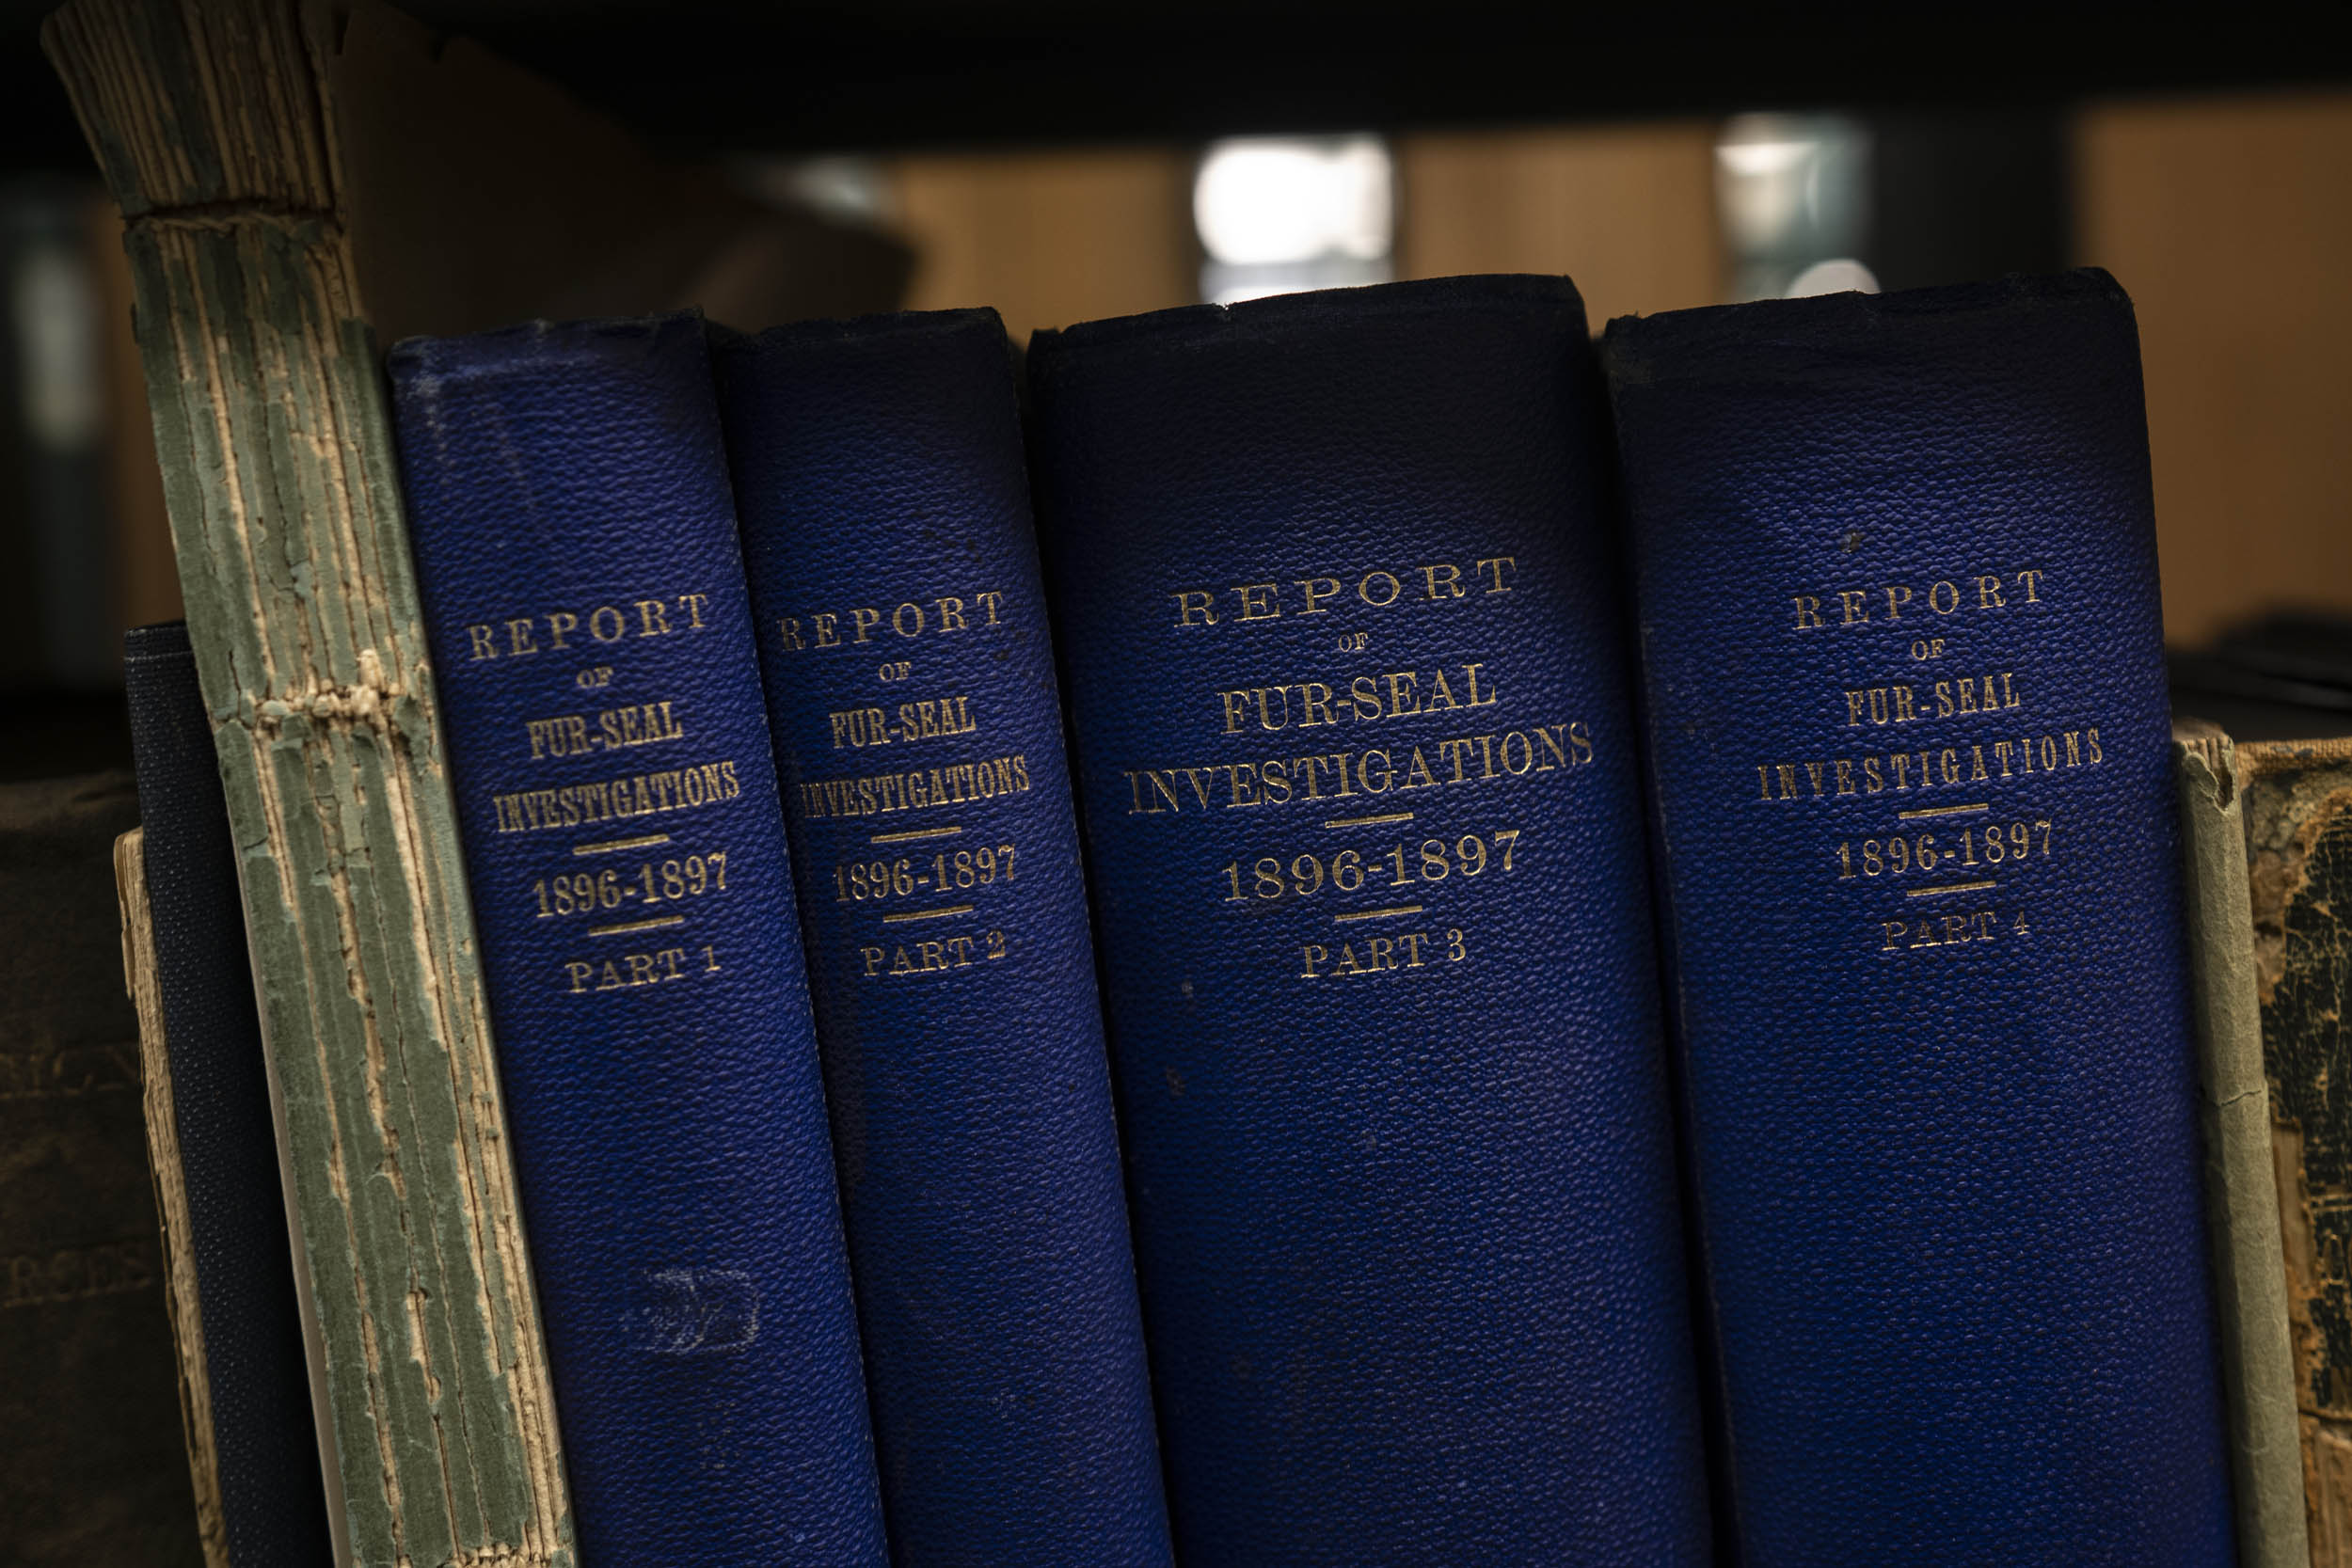 Dark blue books, volumes 1 through 4 of the Repot of Fur-seal Investigations